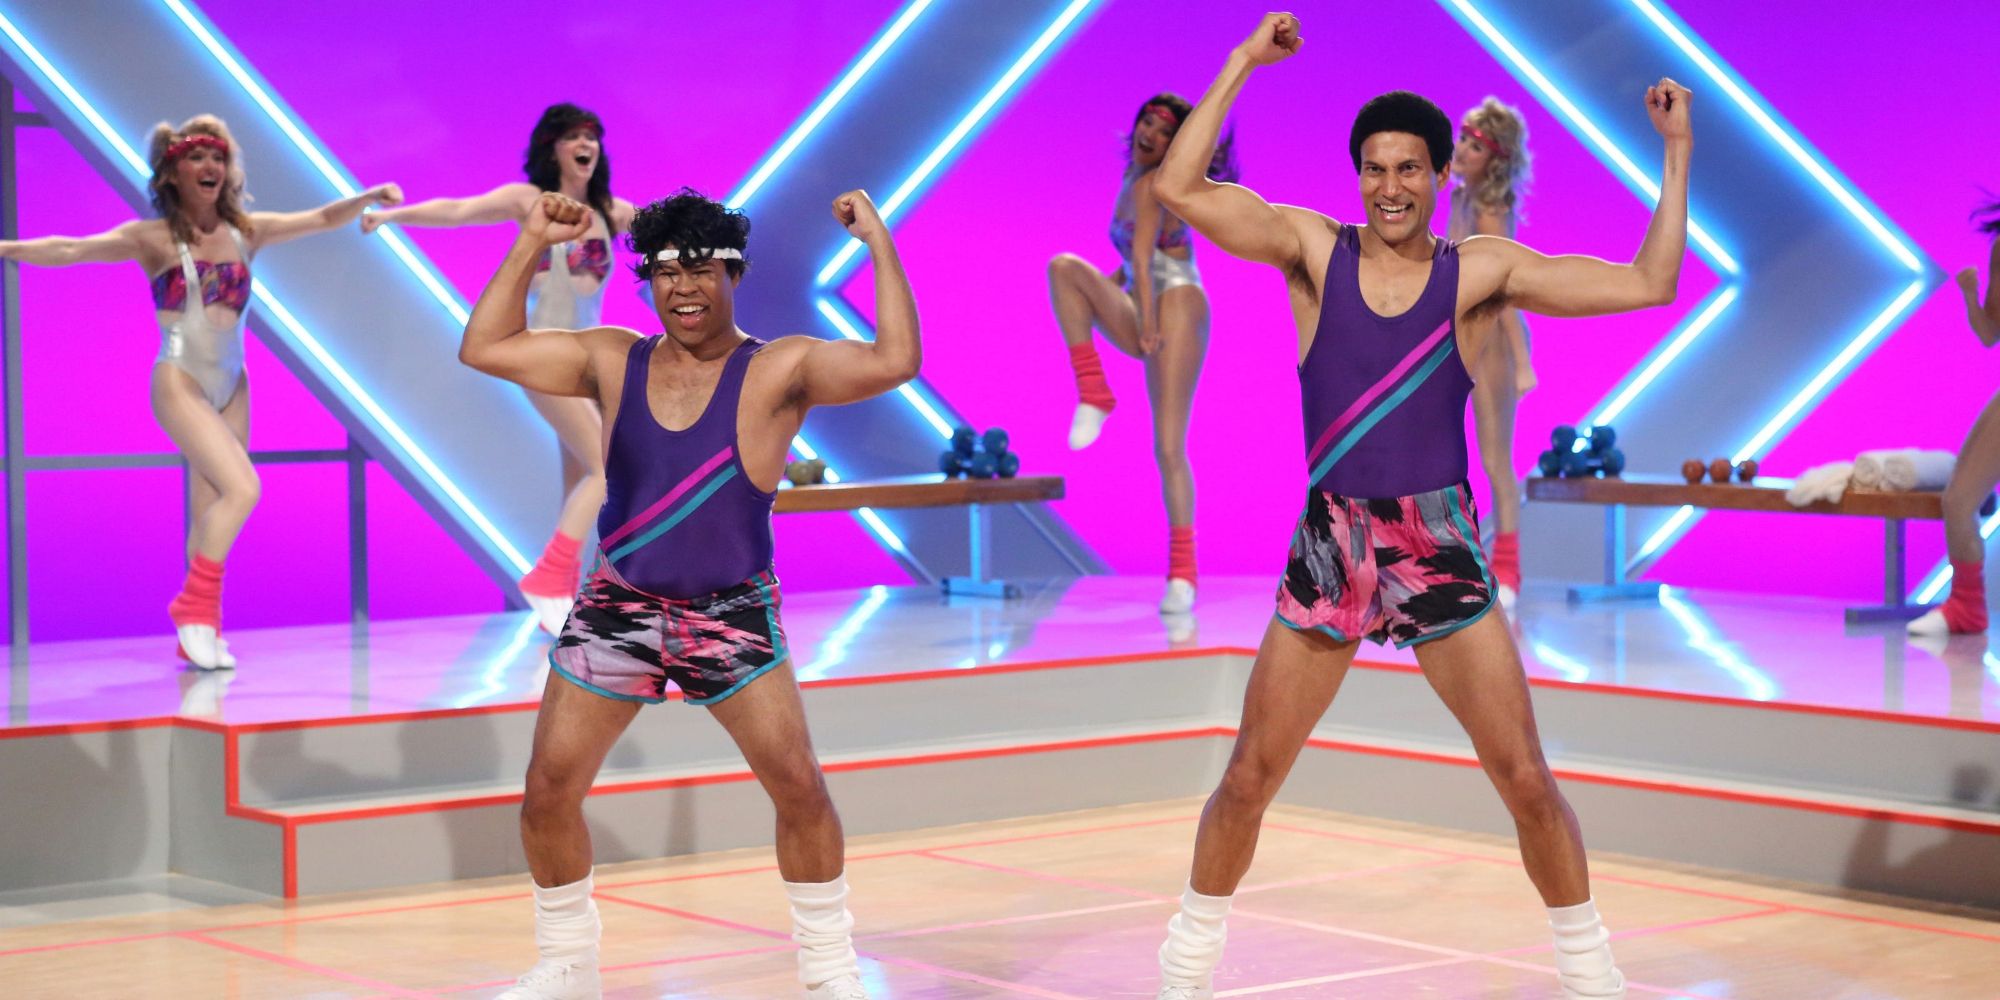 The 1987 Crystal Light Championships Inspired Key & Peele's Creepiest Sketch